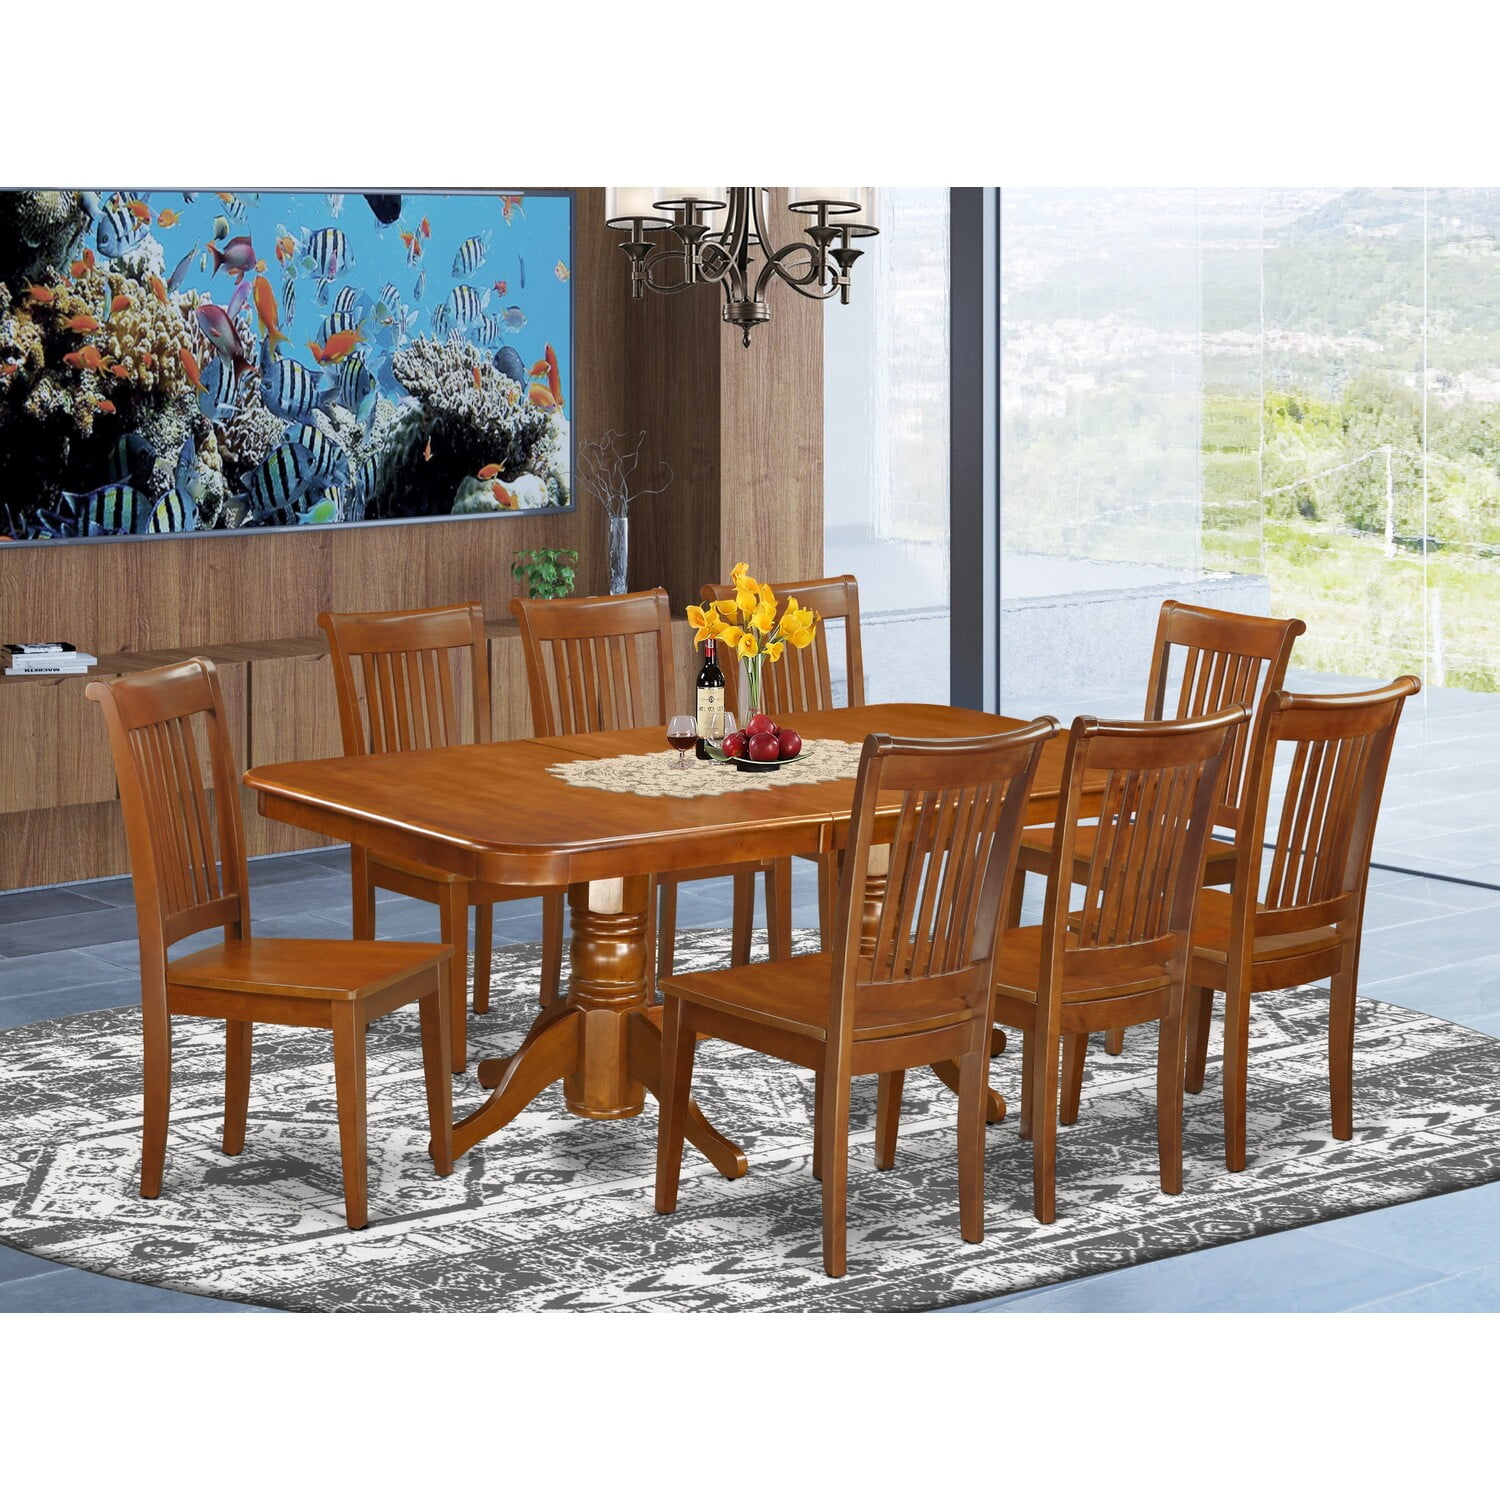 East West Furniture Dining Room Set, Fold Away Dining Room Table And Chairs Set In Egypt